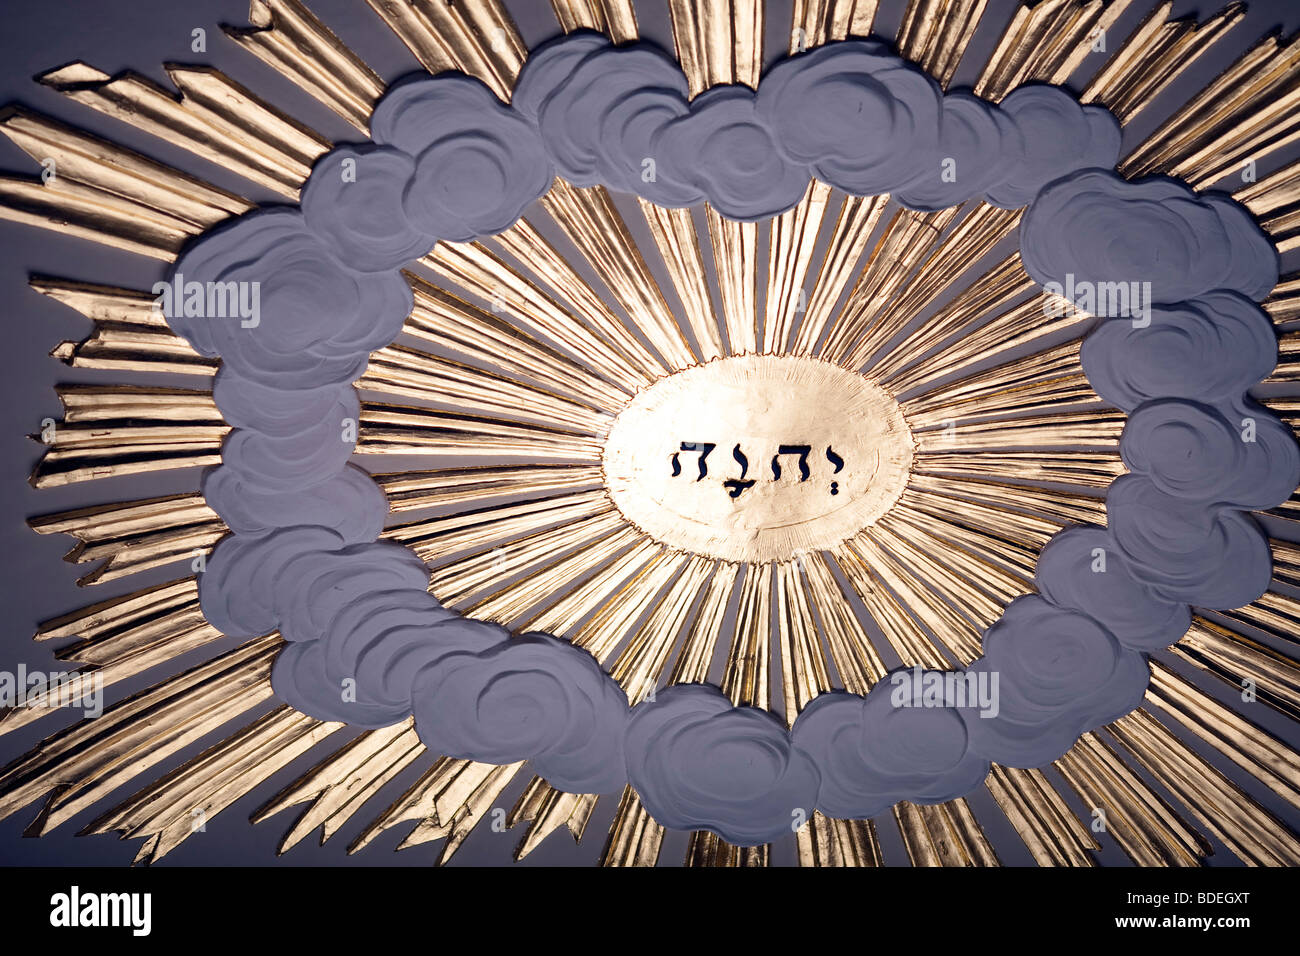 The Hebrew word meaning 'God' on the ceiling of Saint Martin in the Fields church, London, England, United Kingdom Stock Photo